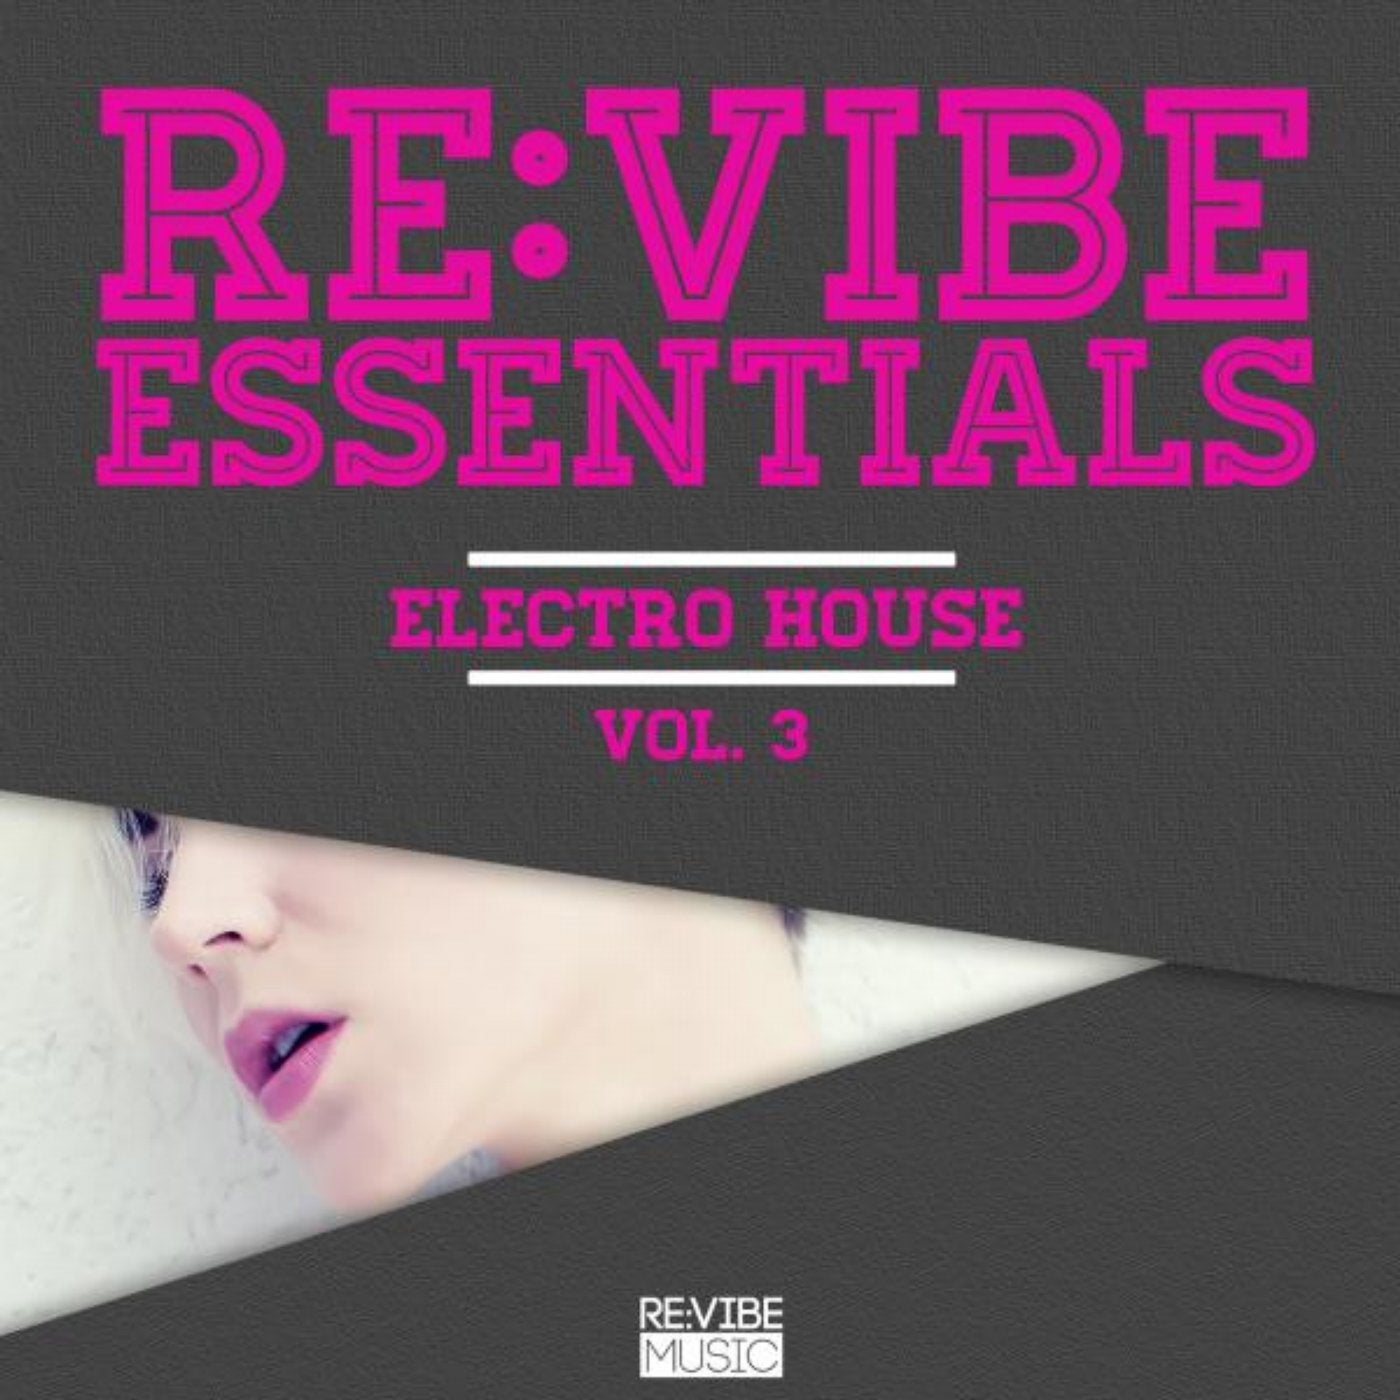 Re:Vibe Essentials - Electro House, Vol. 3